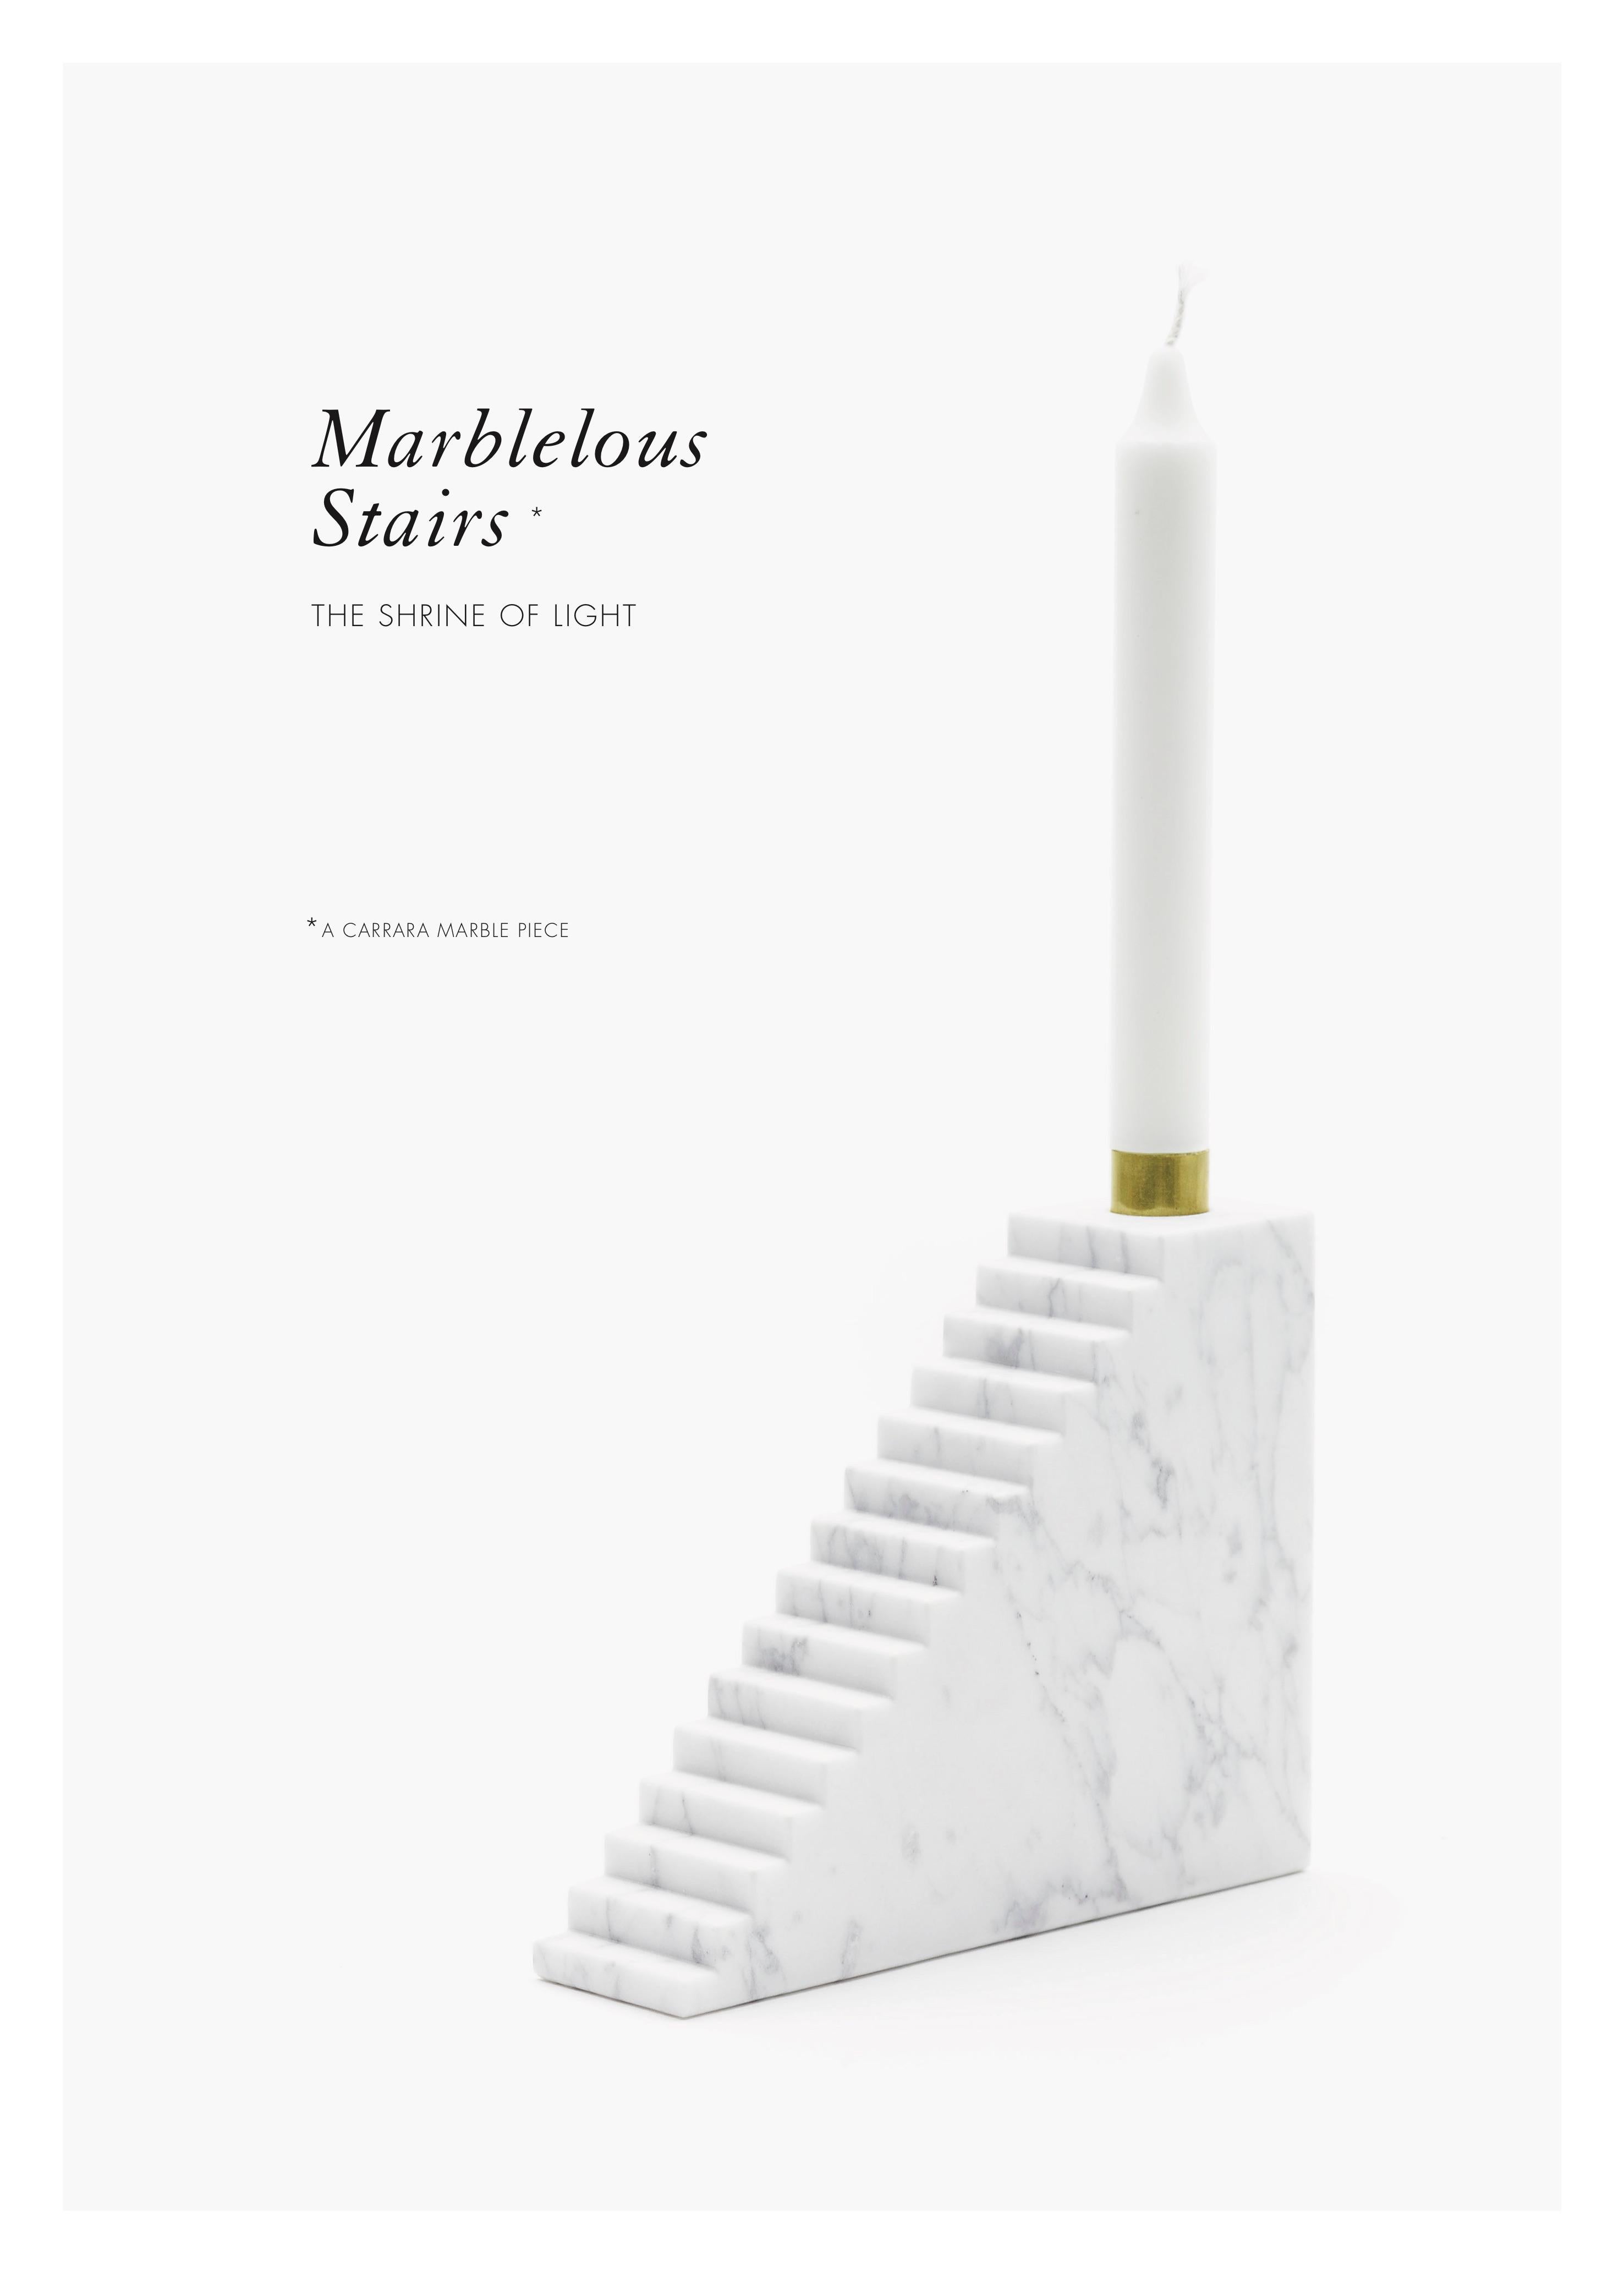 Spanish “Marblelous Stairs” White Carrara Marble Minimalist Candle Holder by Aparentment For Sale